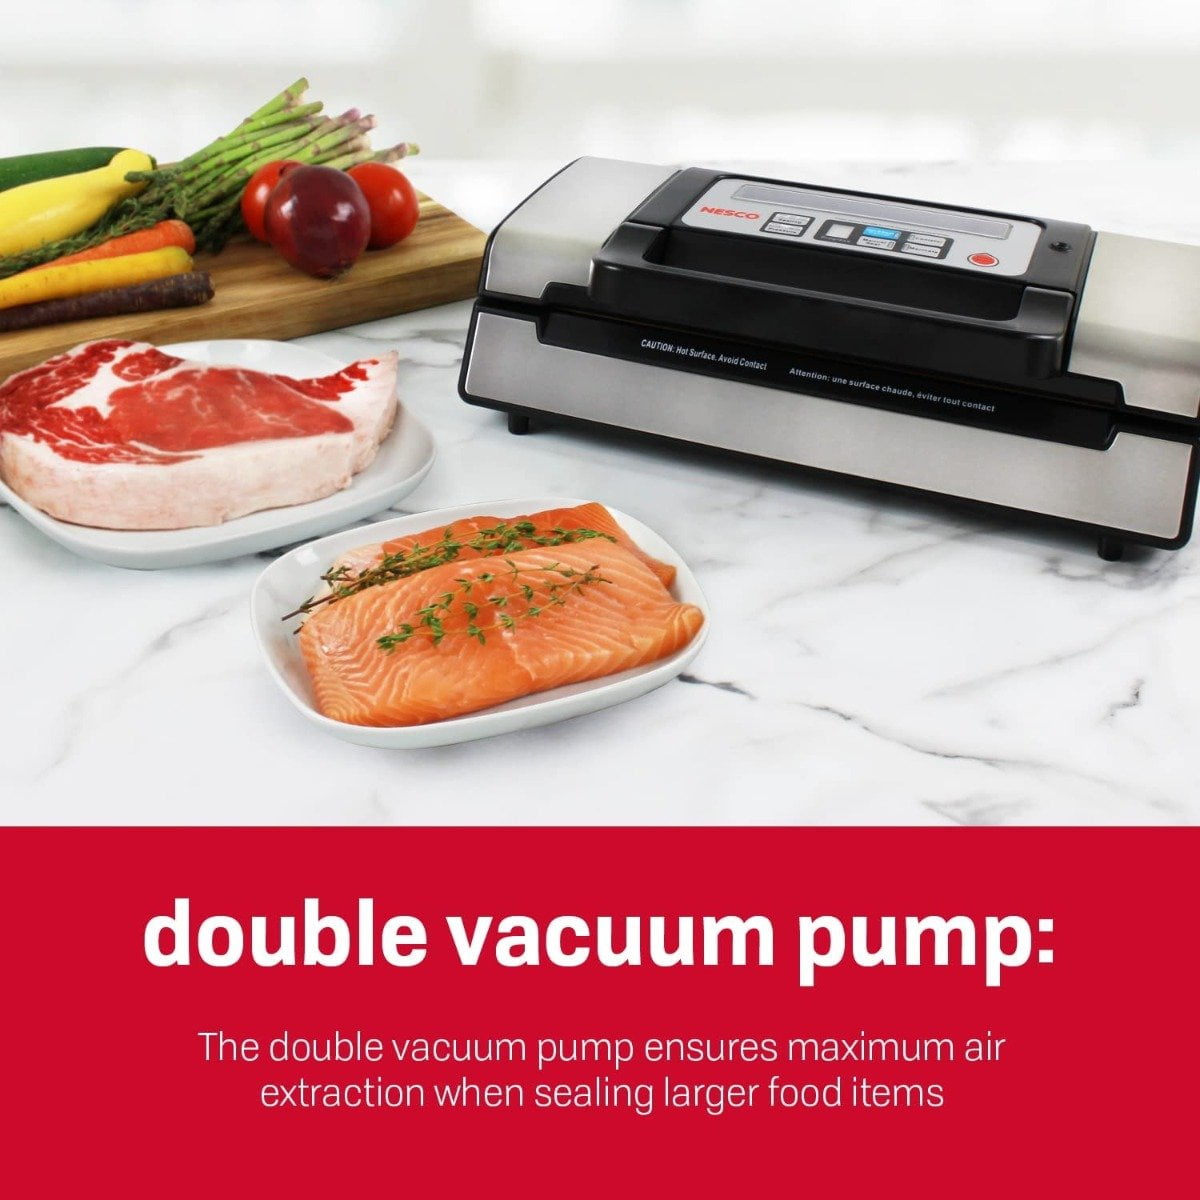 Nesco Deluxe Vacuum Food Sealer Usage and Review 